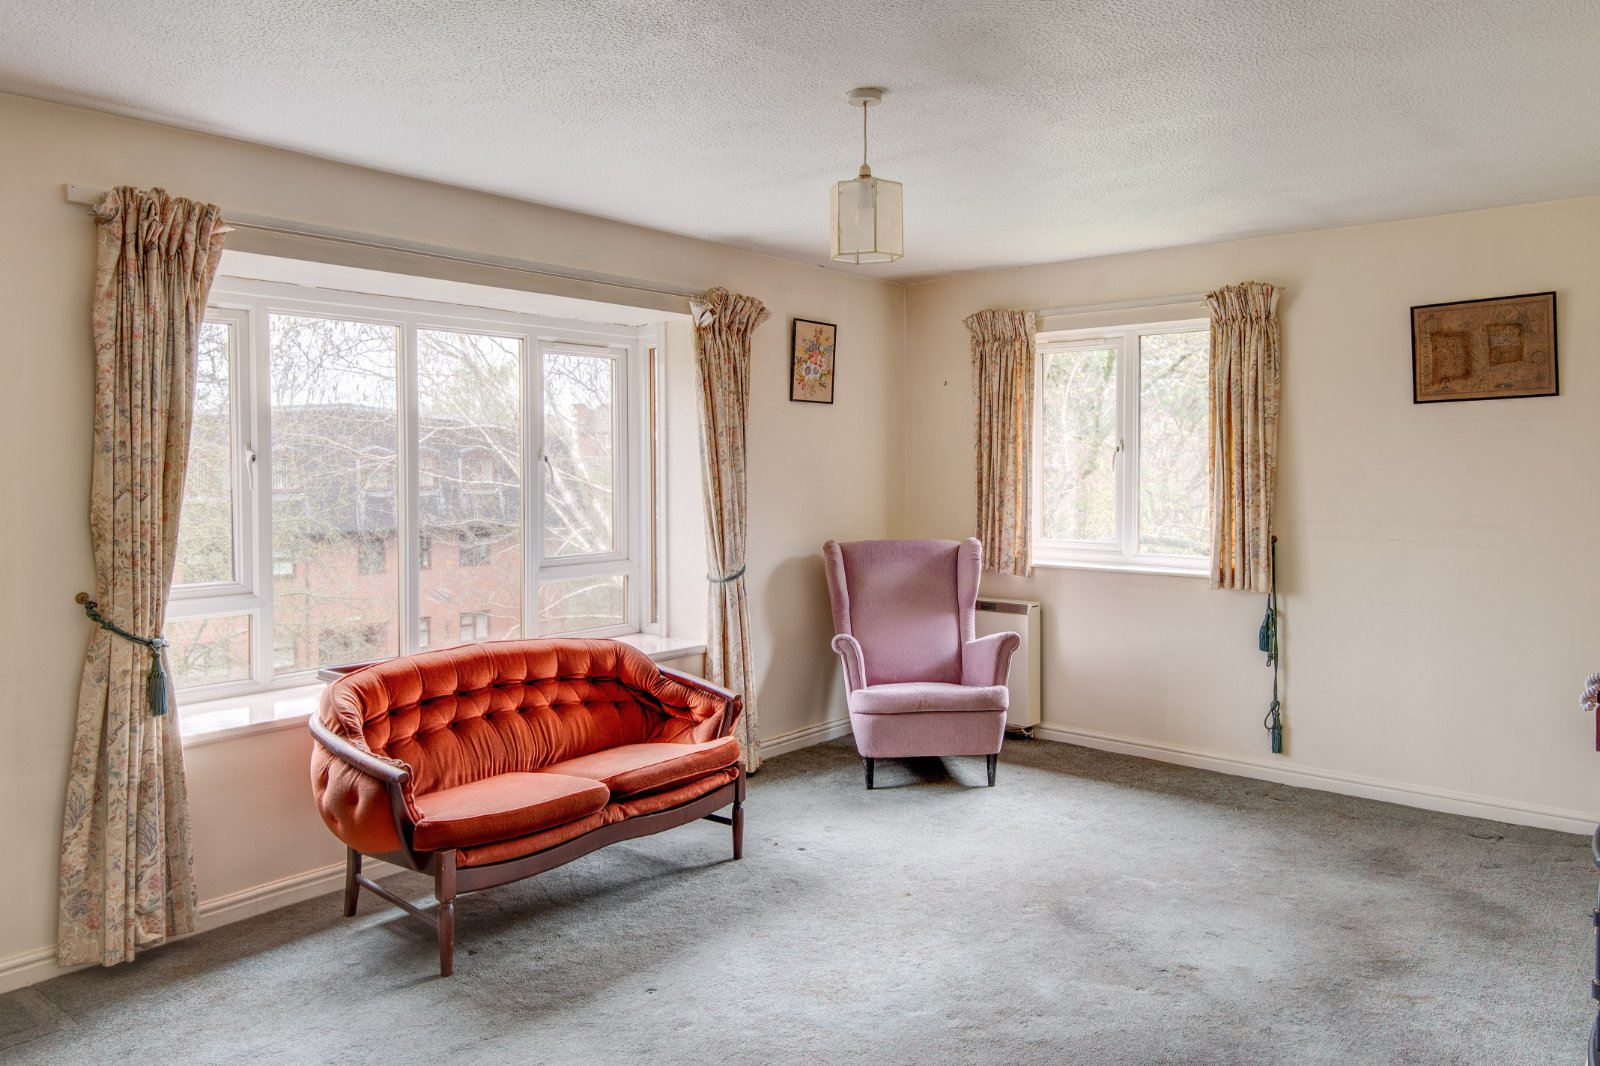 1 bed  for sale in Housman Park, Bromsgrove 2